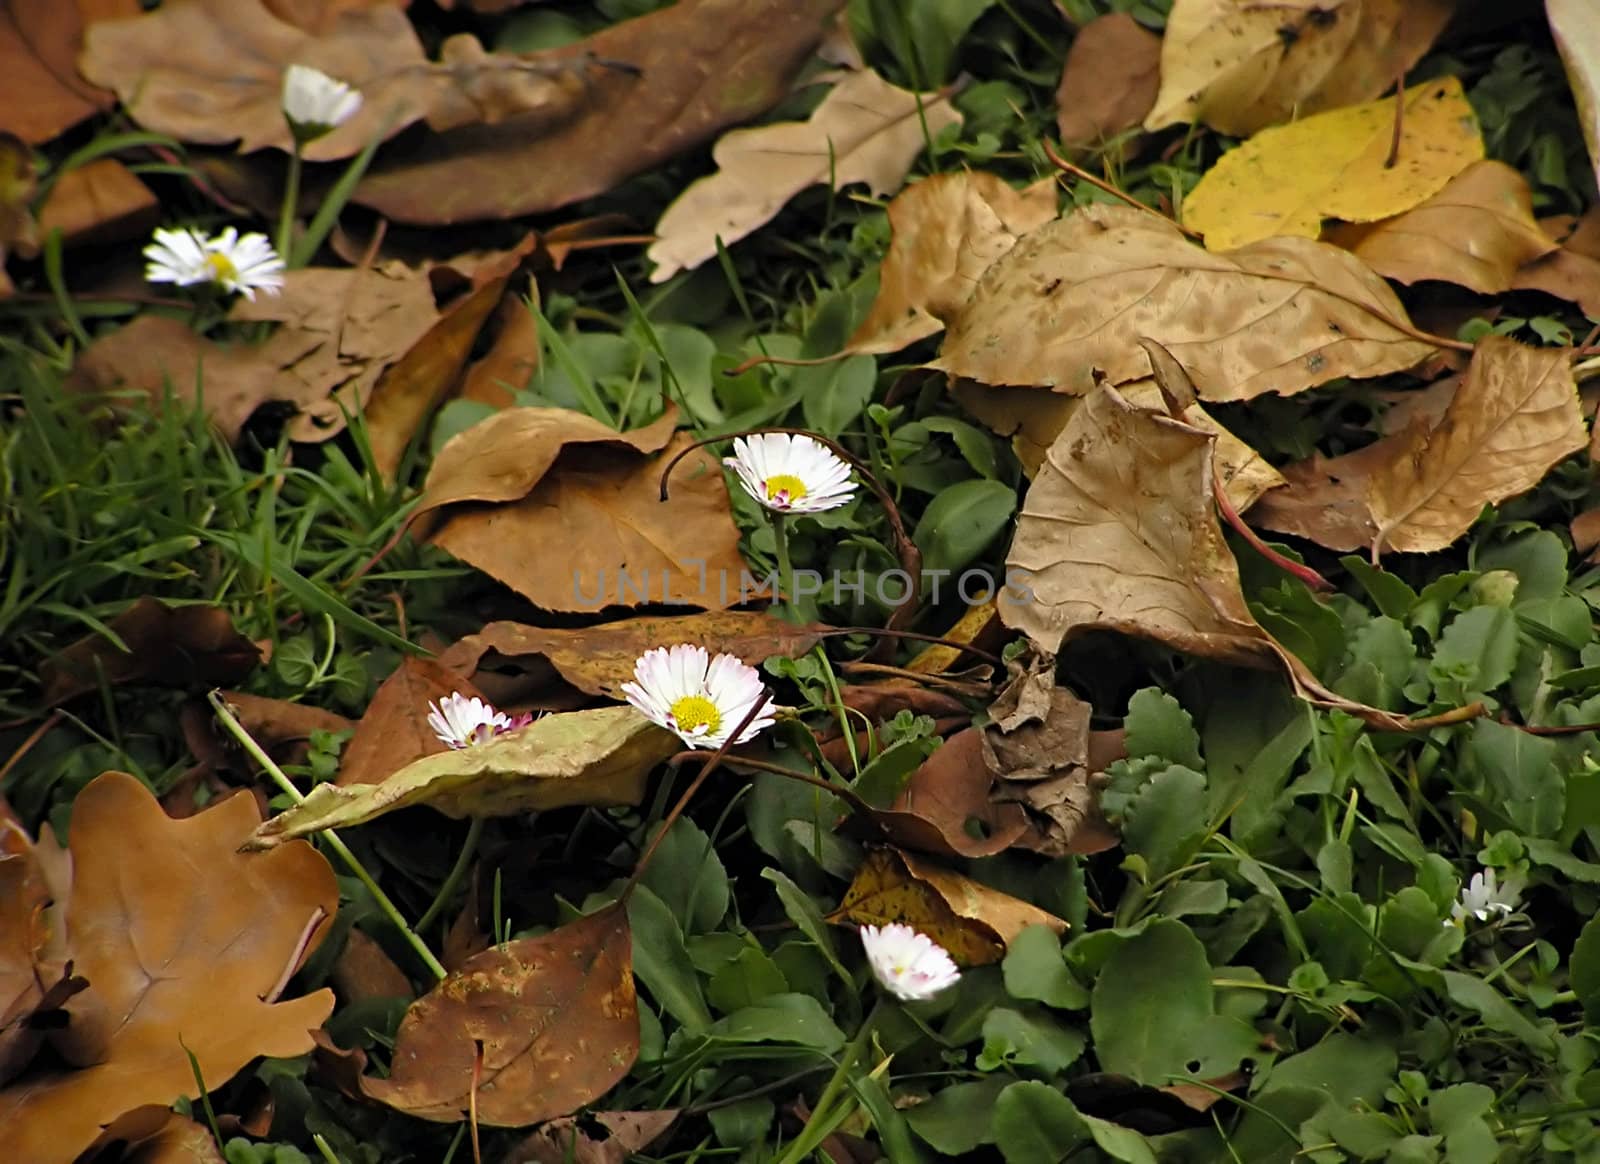 Flowering daisies side by side with brown autumn leaves